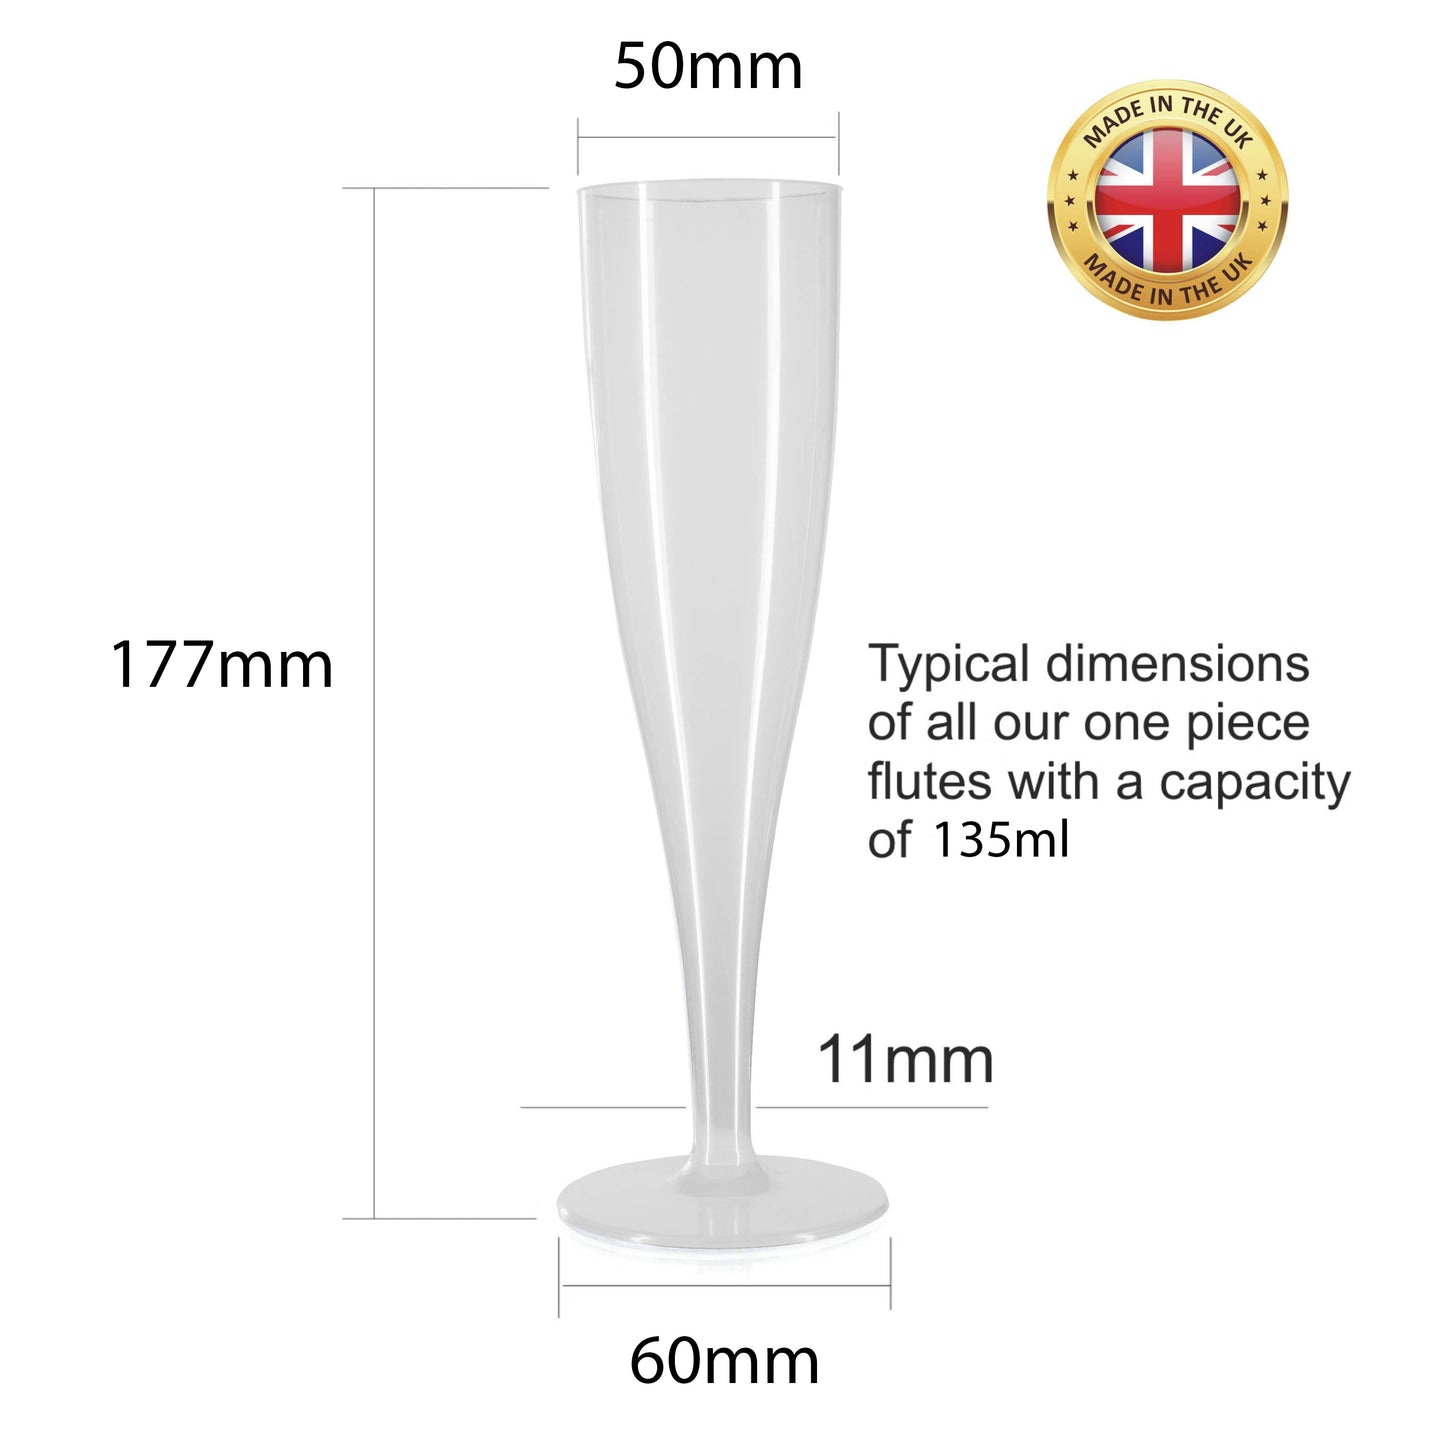 50 x White Biodegradable Prosecco Flutes - 135ml - One Piece Glossy Champagne Glass